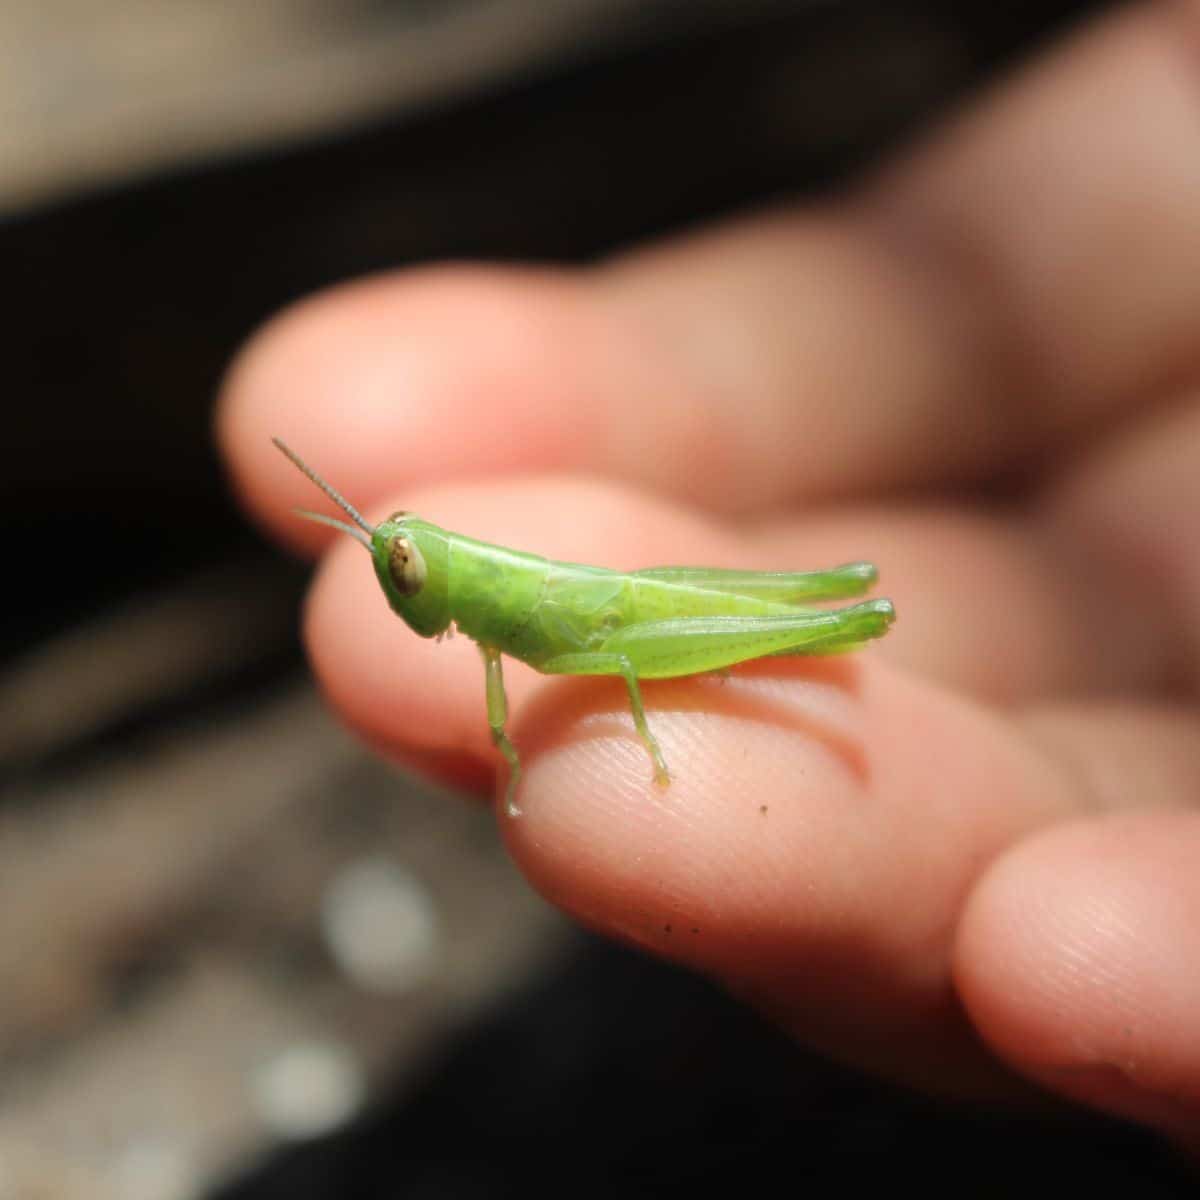 What is the spiritual meaning of green grasshopper